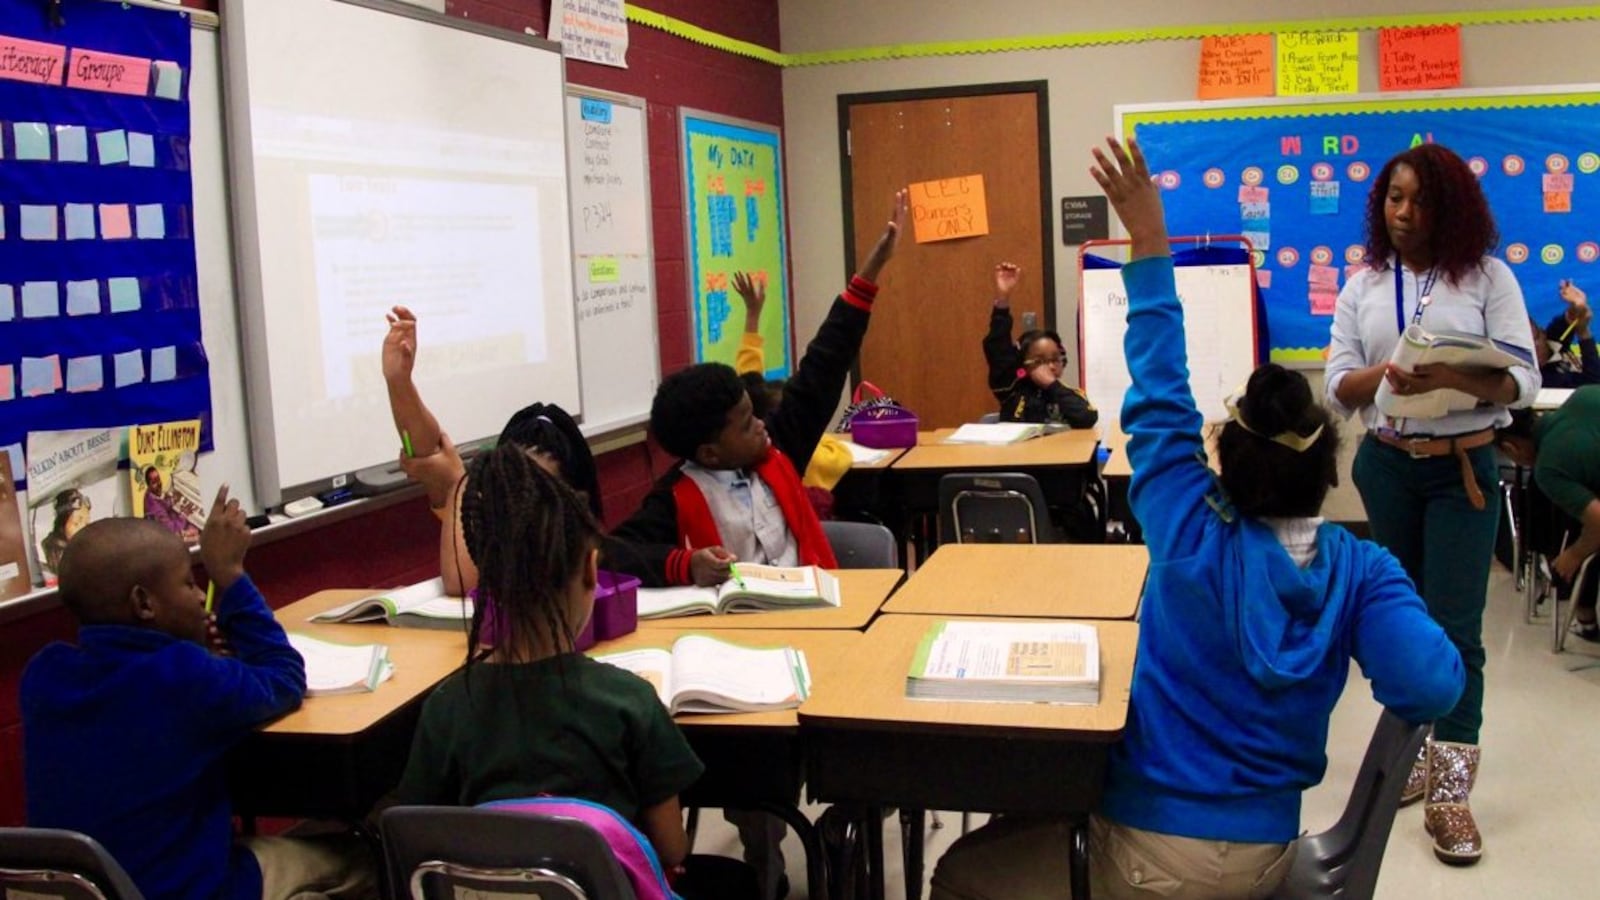 Alexia Young teaches third-graders at Lucie E. Campbell Elementary School in Memphis, where she also doubles as the dance coach.